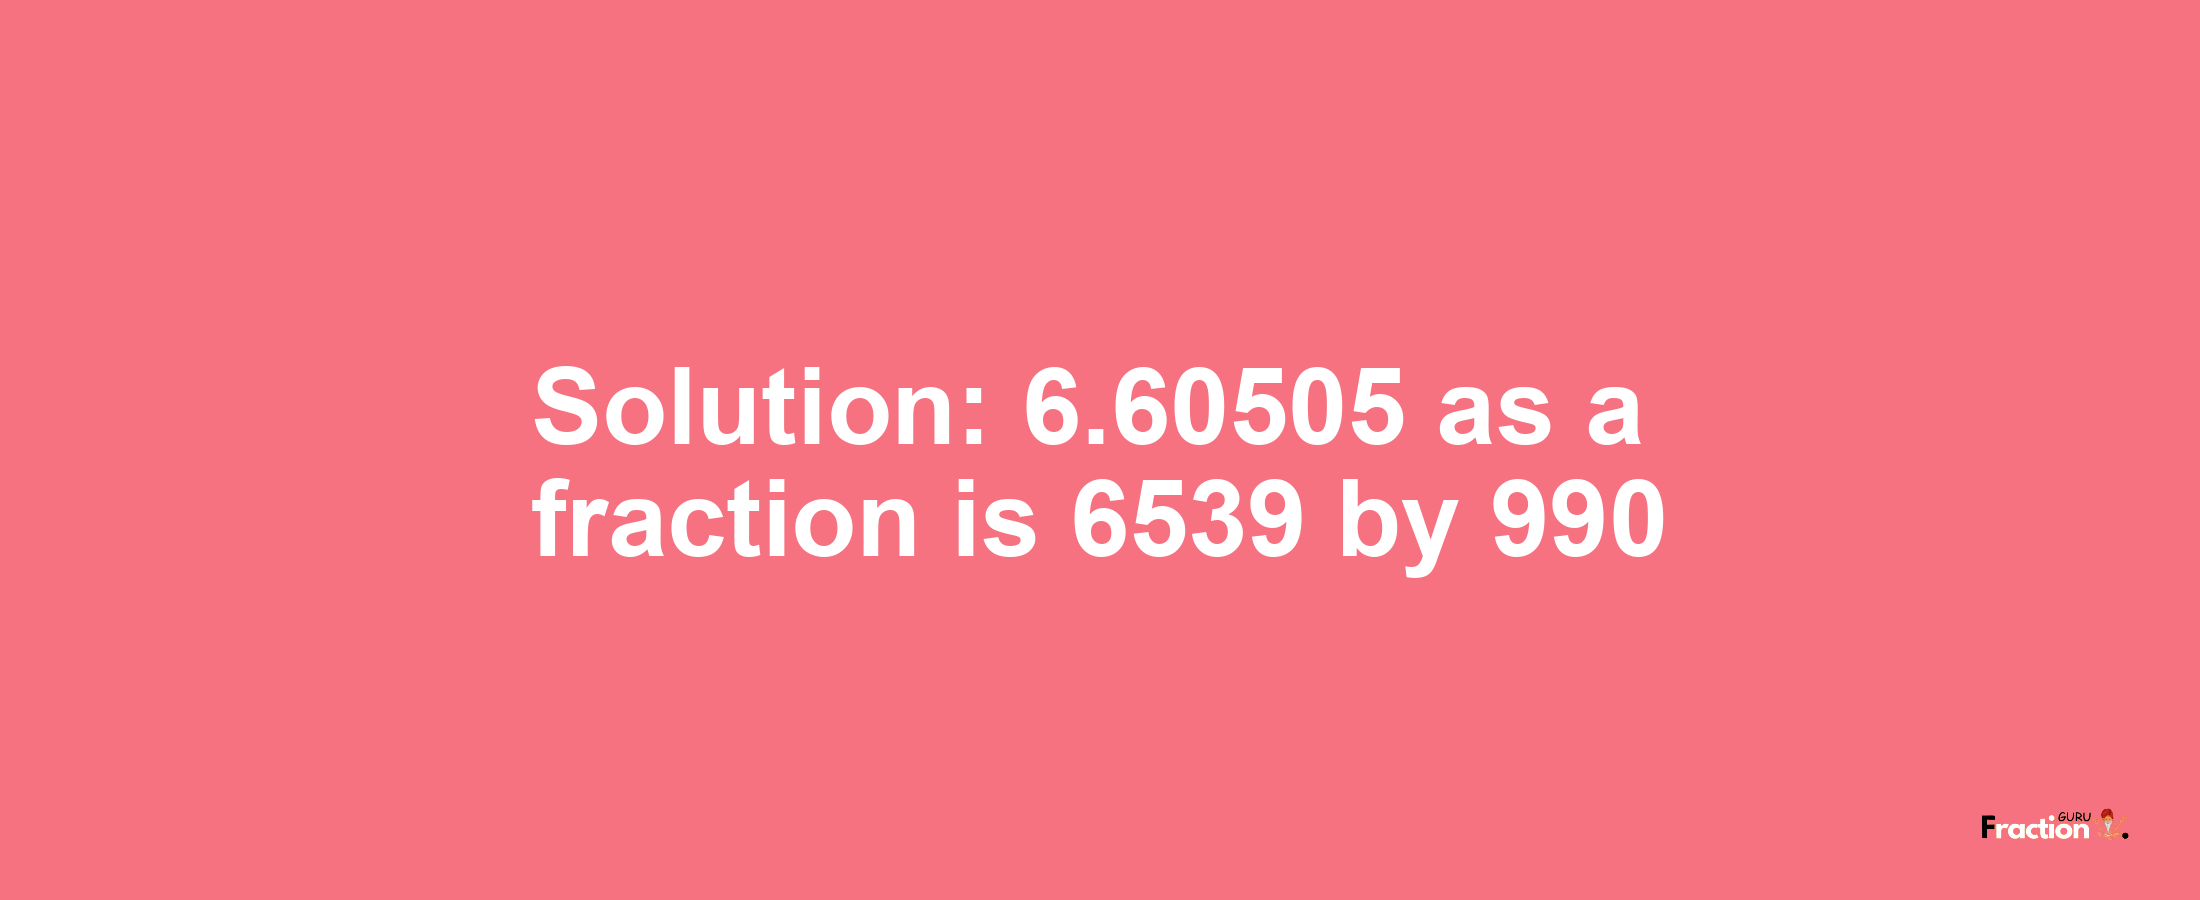 Solution:6.60505 as a fraction is 6539/990